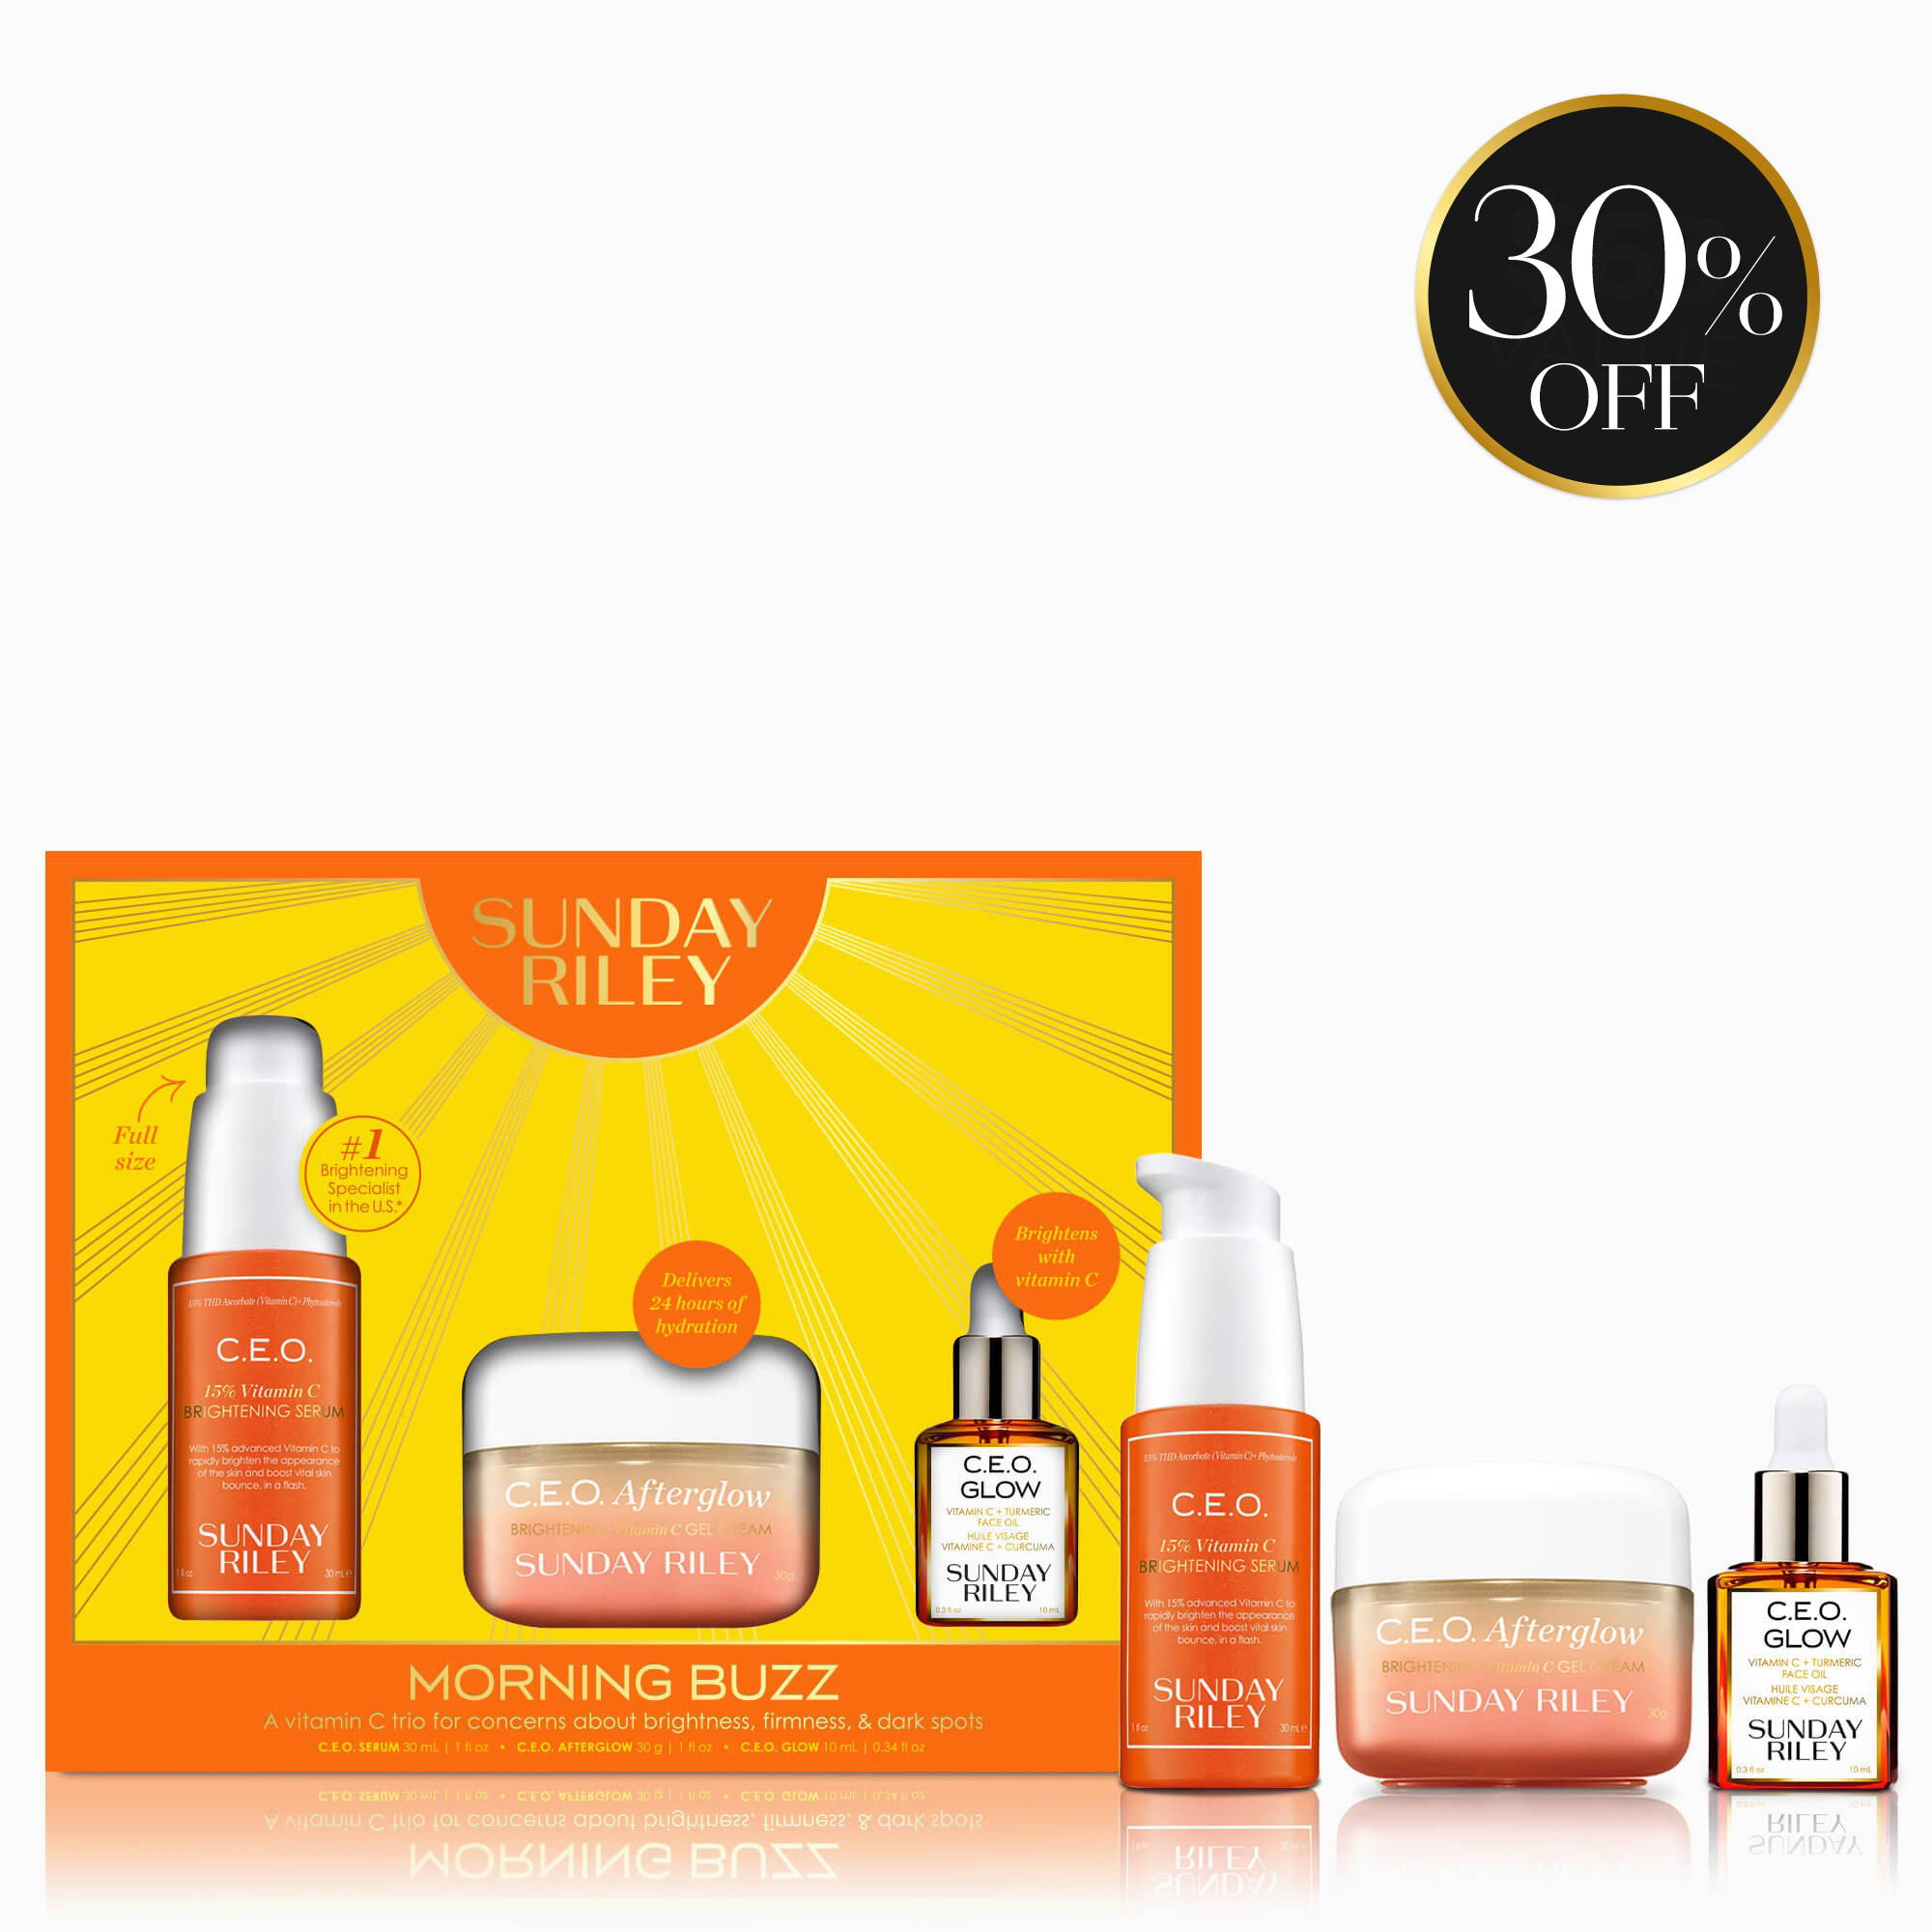 MORNING BUZZ A VITAMIN C TRIO FOR CONCERNS ABOUT BRIGHTNESS, FIRMNESS, AND DARK SPOTS